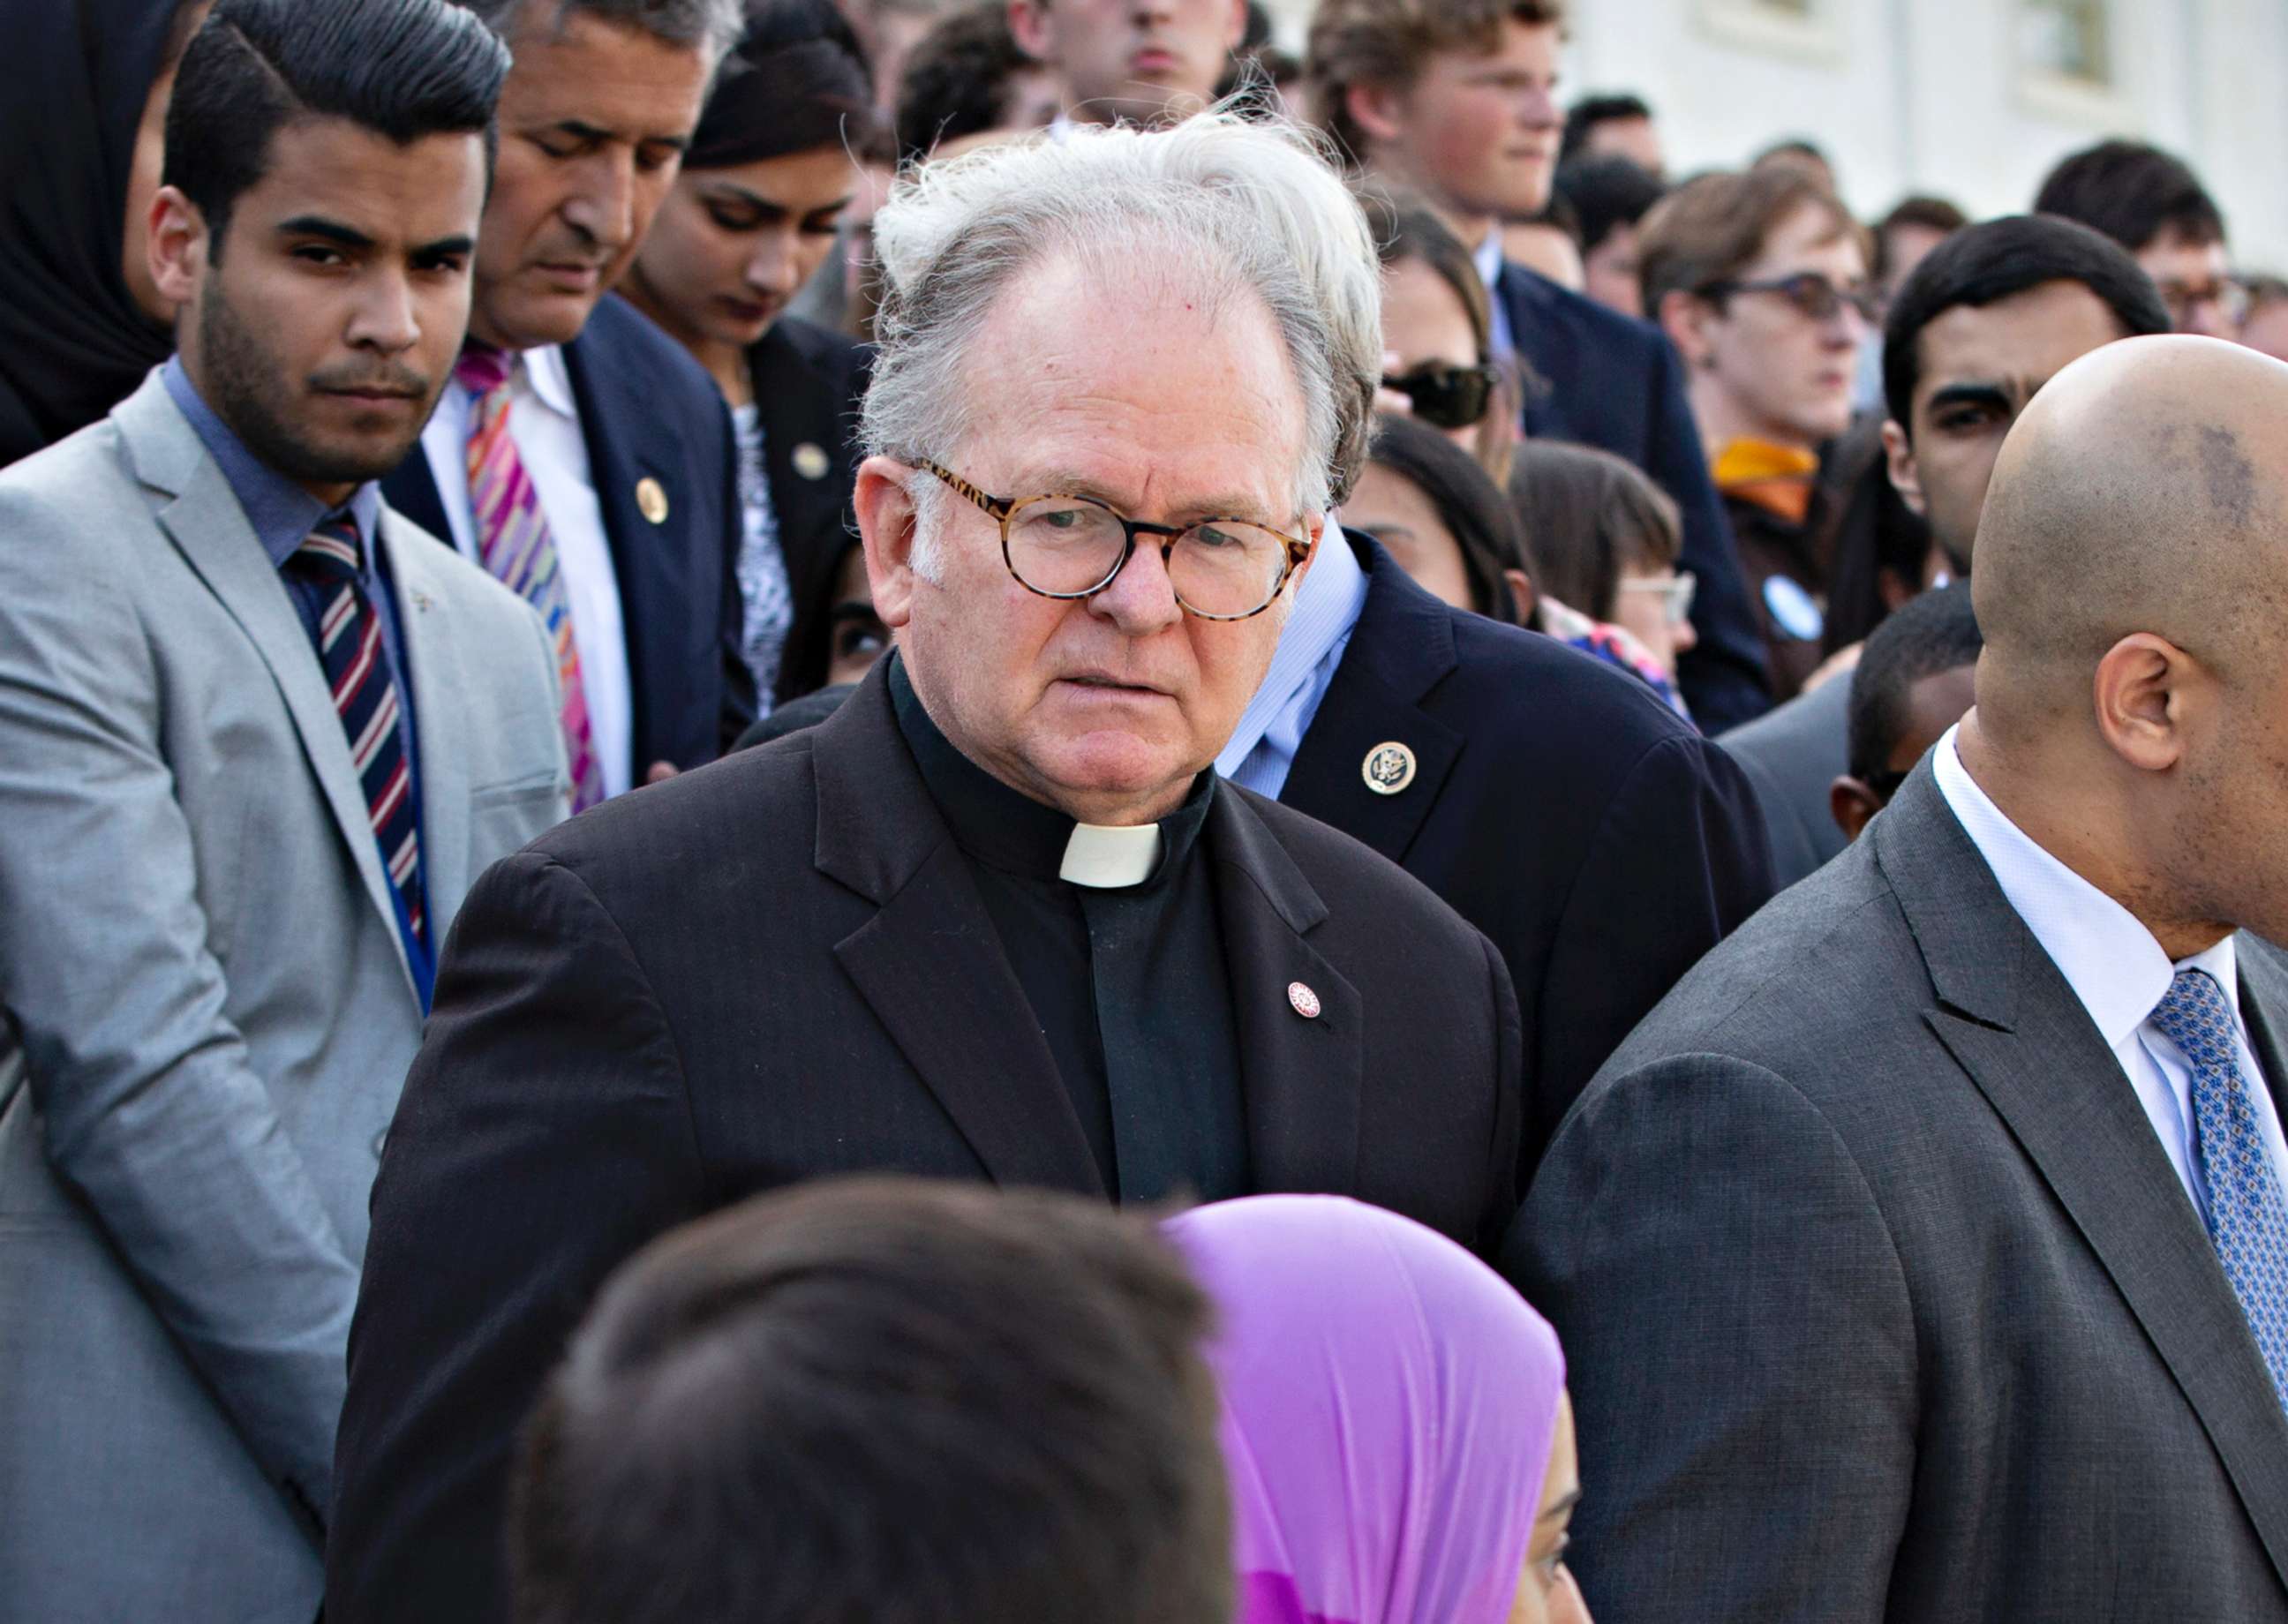 PHOTO: A June 13, 2016 file photo Rev. Patrick Conroy who recently resigned as chaplain of the House of Representatives at the request of House Speaker Paul Ryan. 